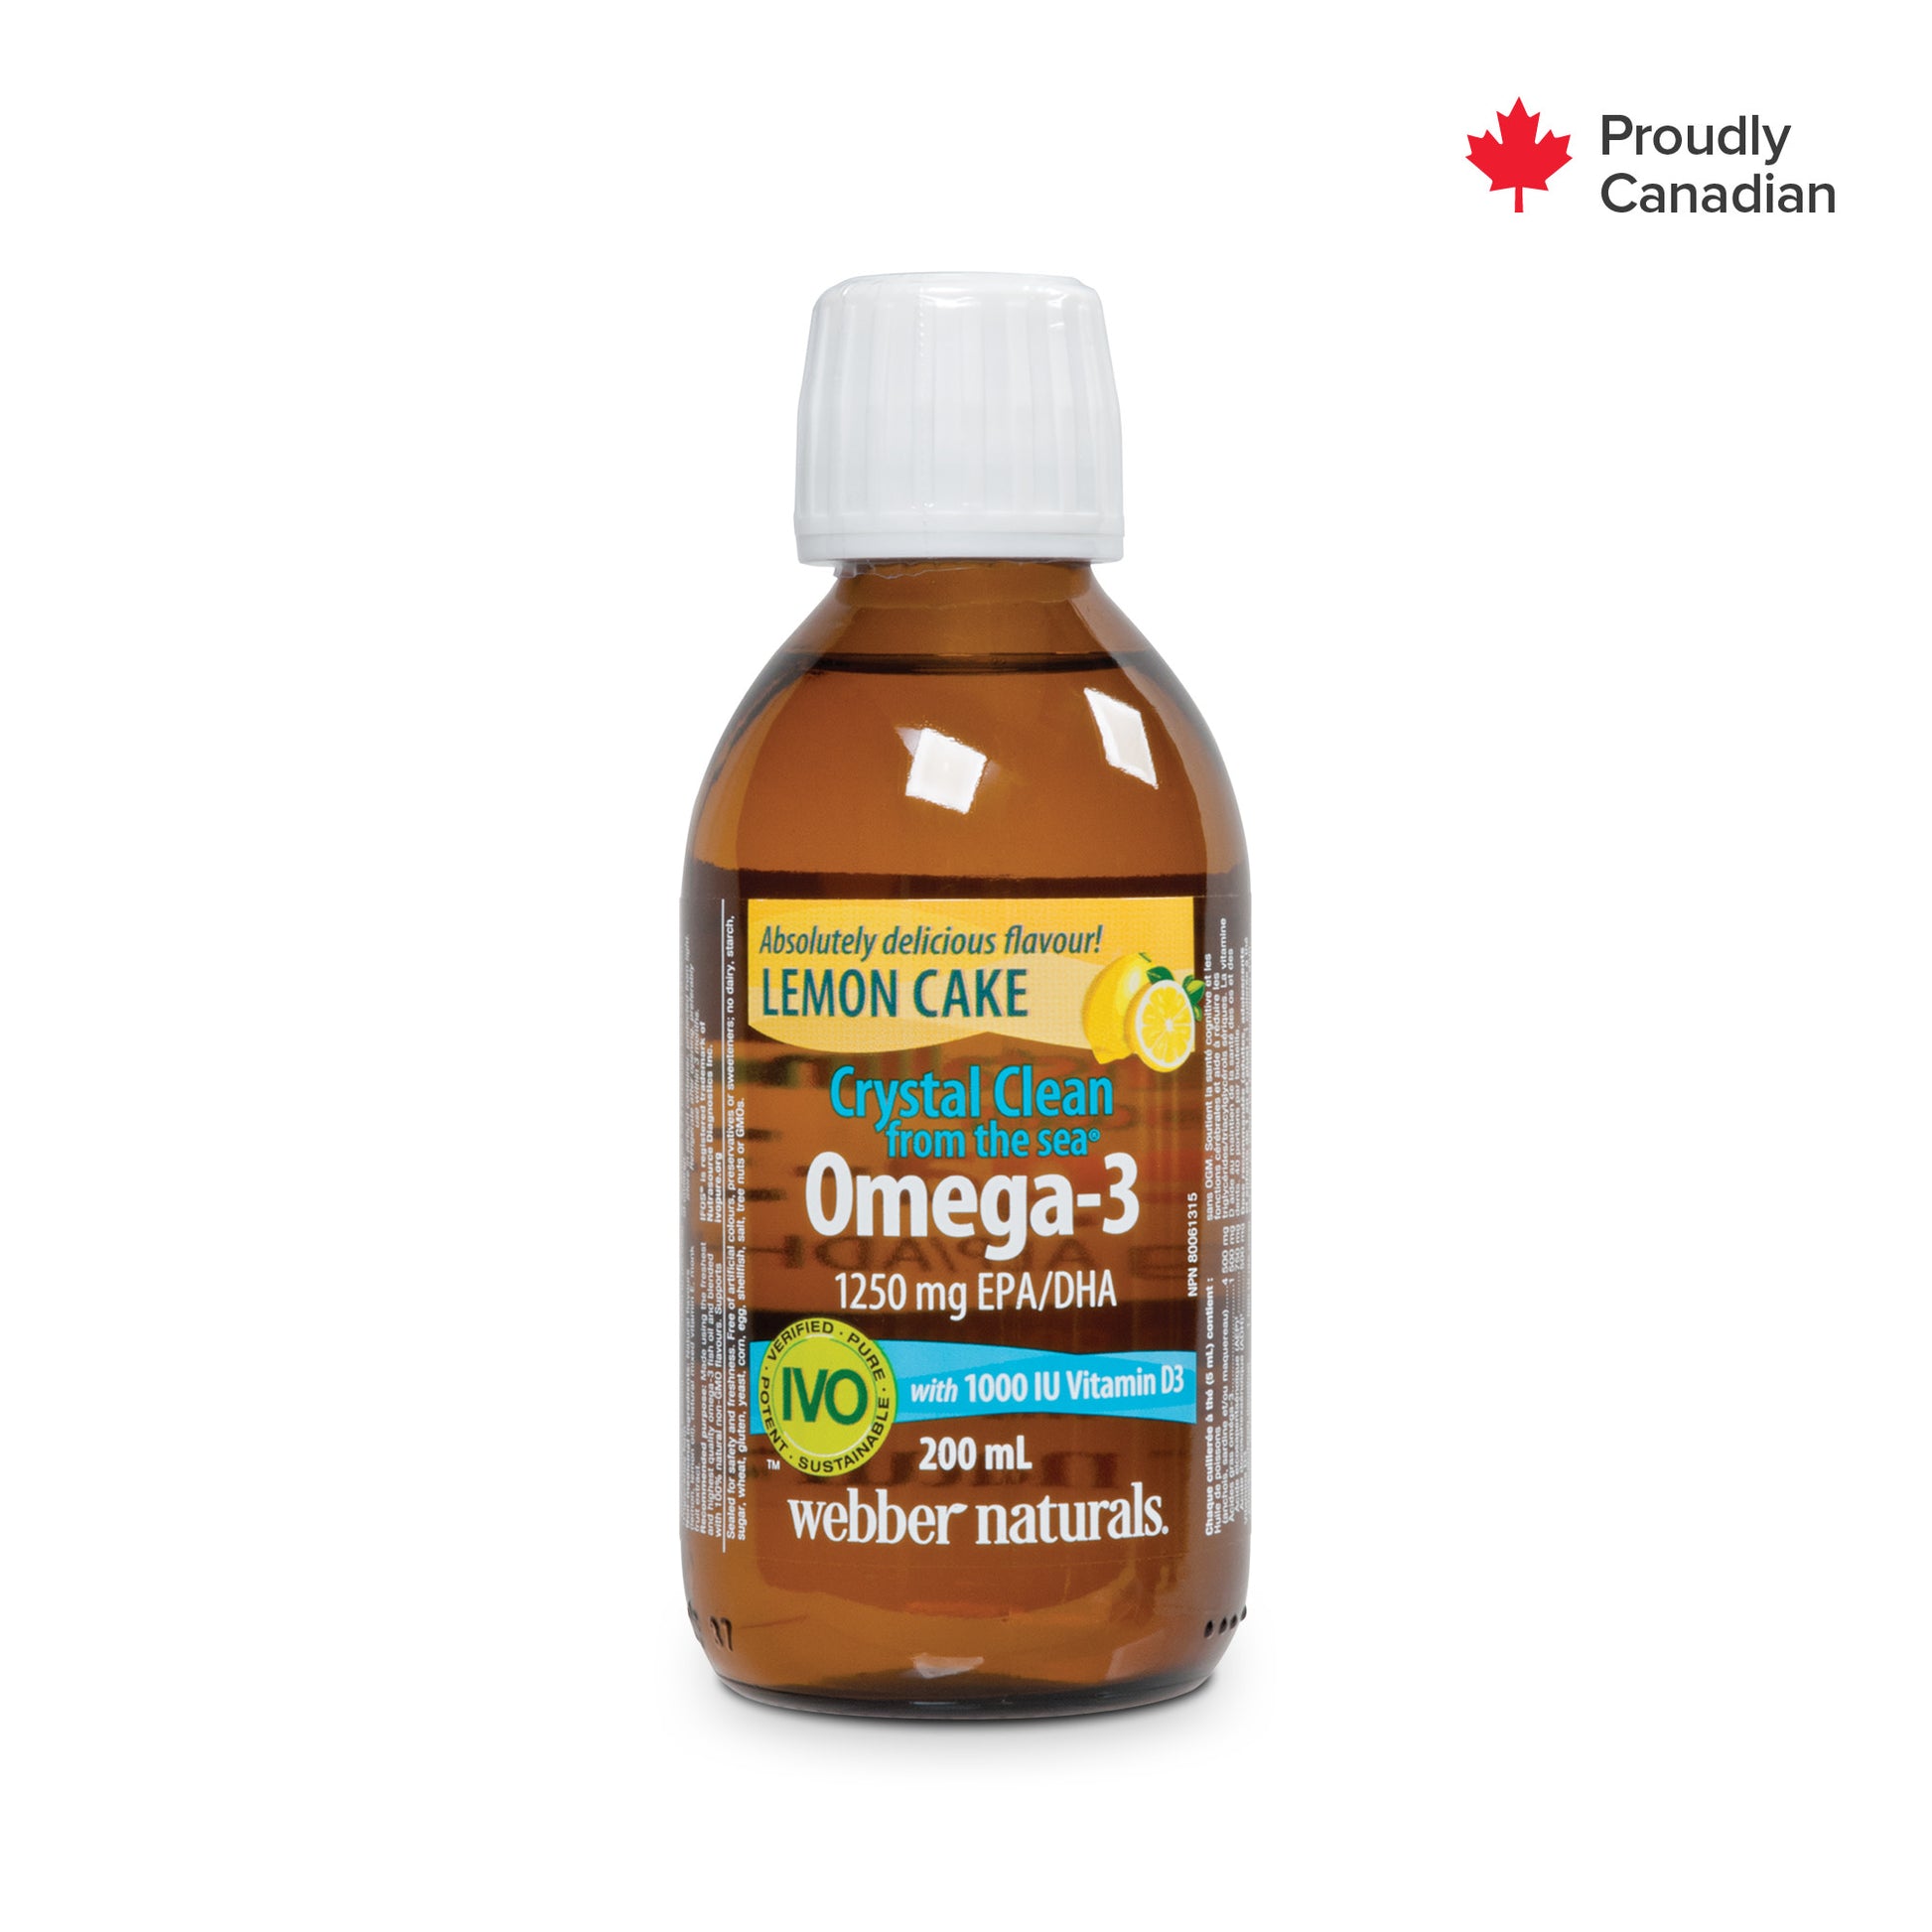 Crystal Clean from the sea® Omega-3 with 1000 IU Vitamin D3 1250 mg EPA/DHA Lemon Cake for Webber Naturals|v|hi-res|WN3496